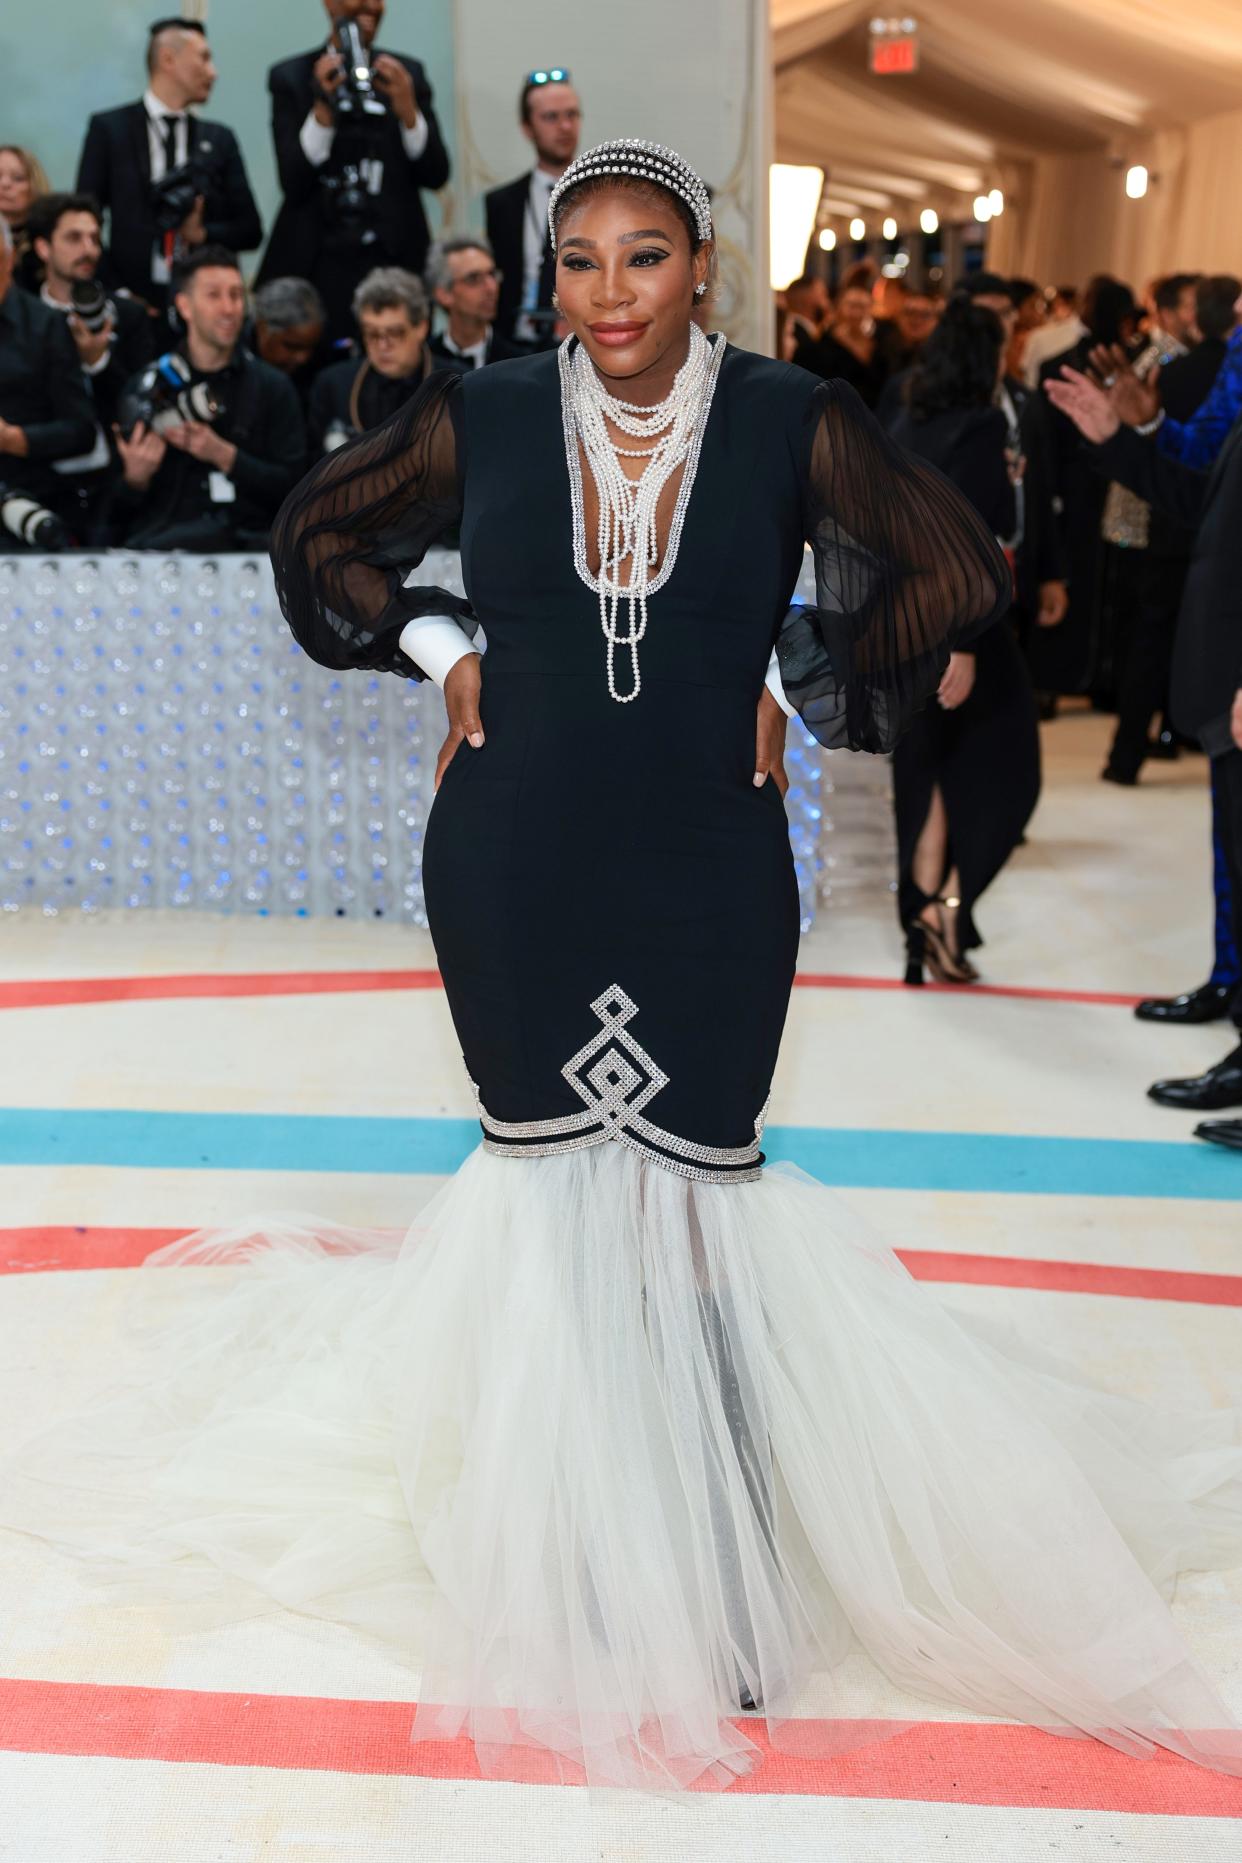 Other than pearls and camellia flowers, baby bumps were the must-have accompaniment for some stars. Serena Williams announced her pregnancy with her second child at the Met Gala.